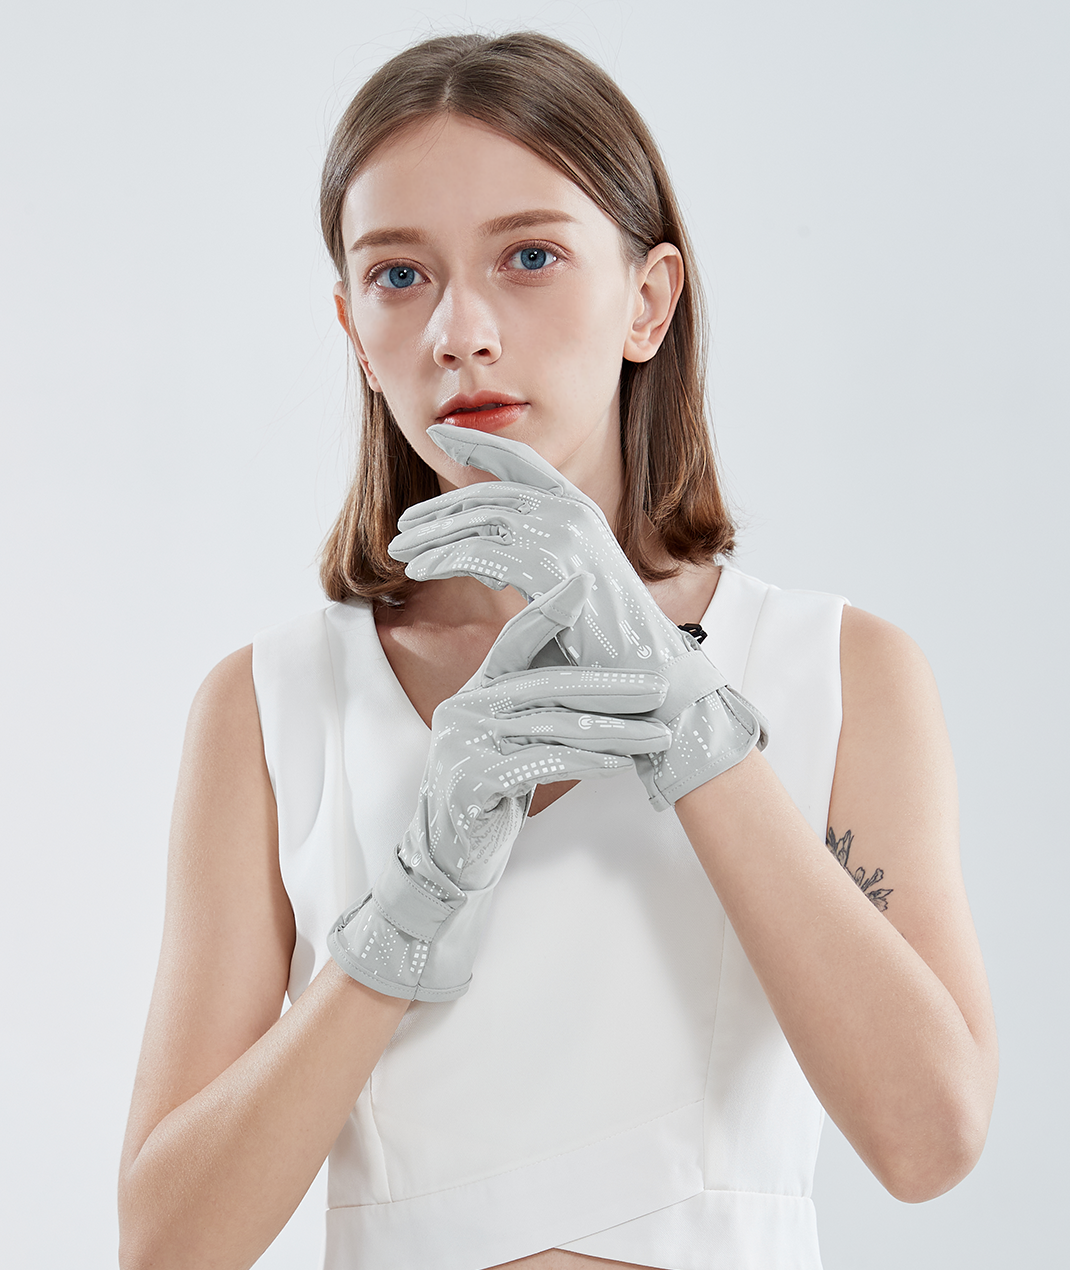 UV Cut / Cool Touch - Anti-mosquito Gloves UPF50+